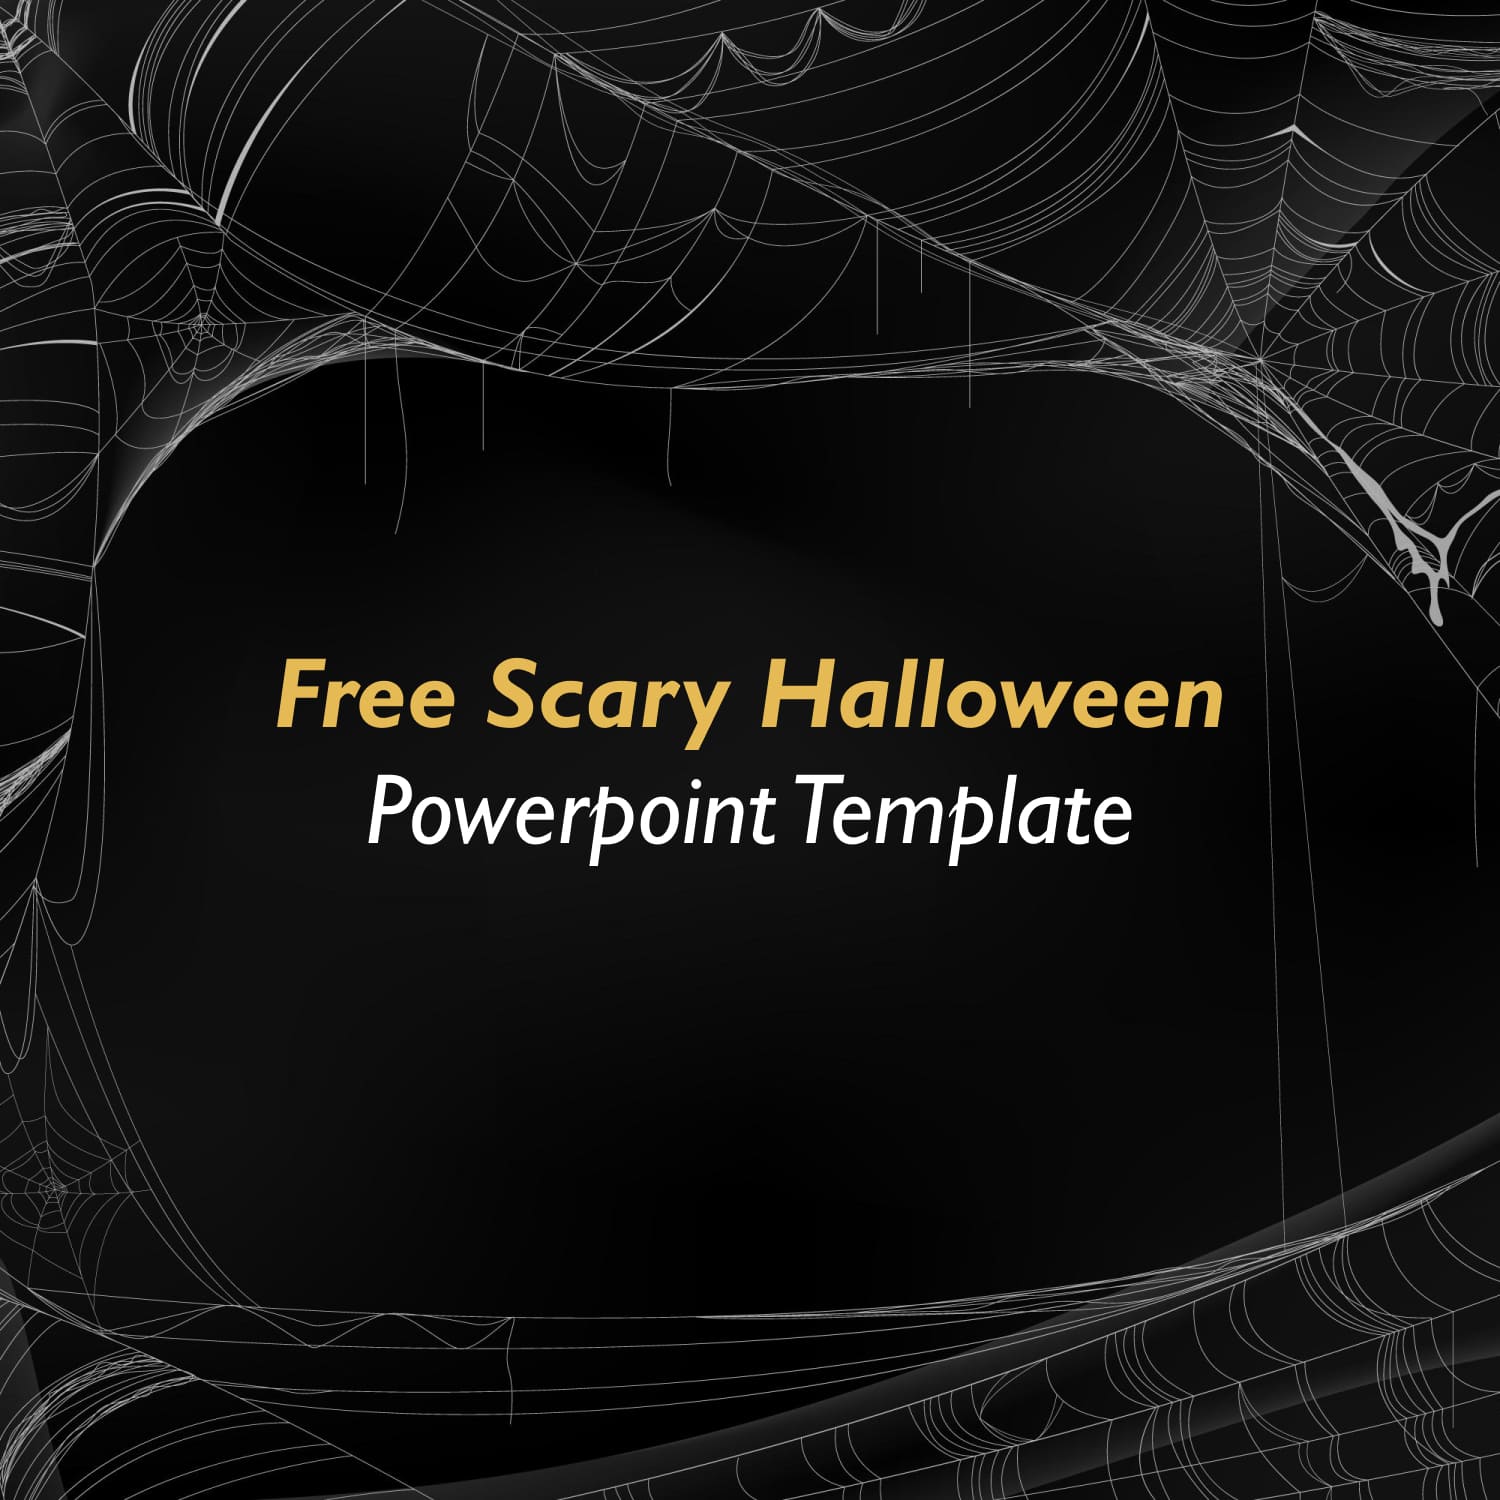 Free Scary Halloween Powerpoint Template.